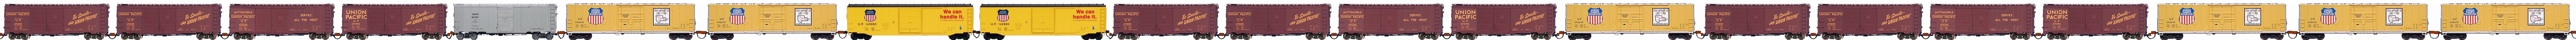 convoi 21 wag BOxcar UP